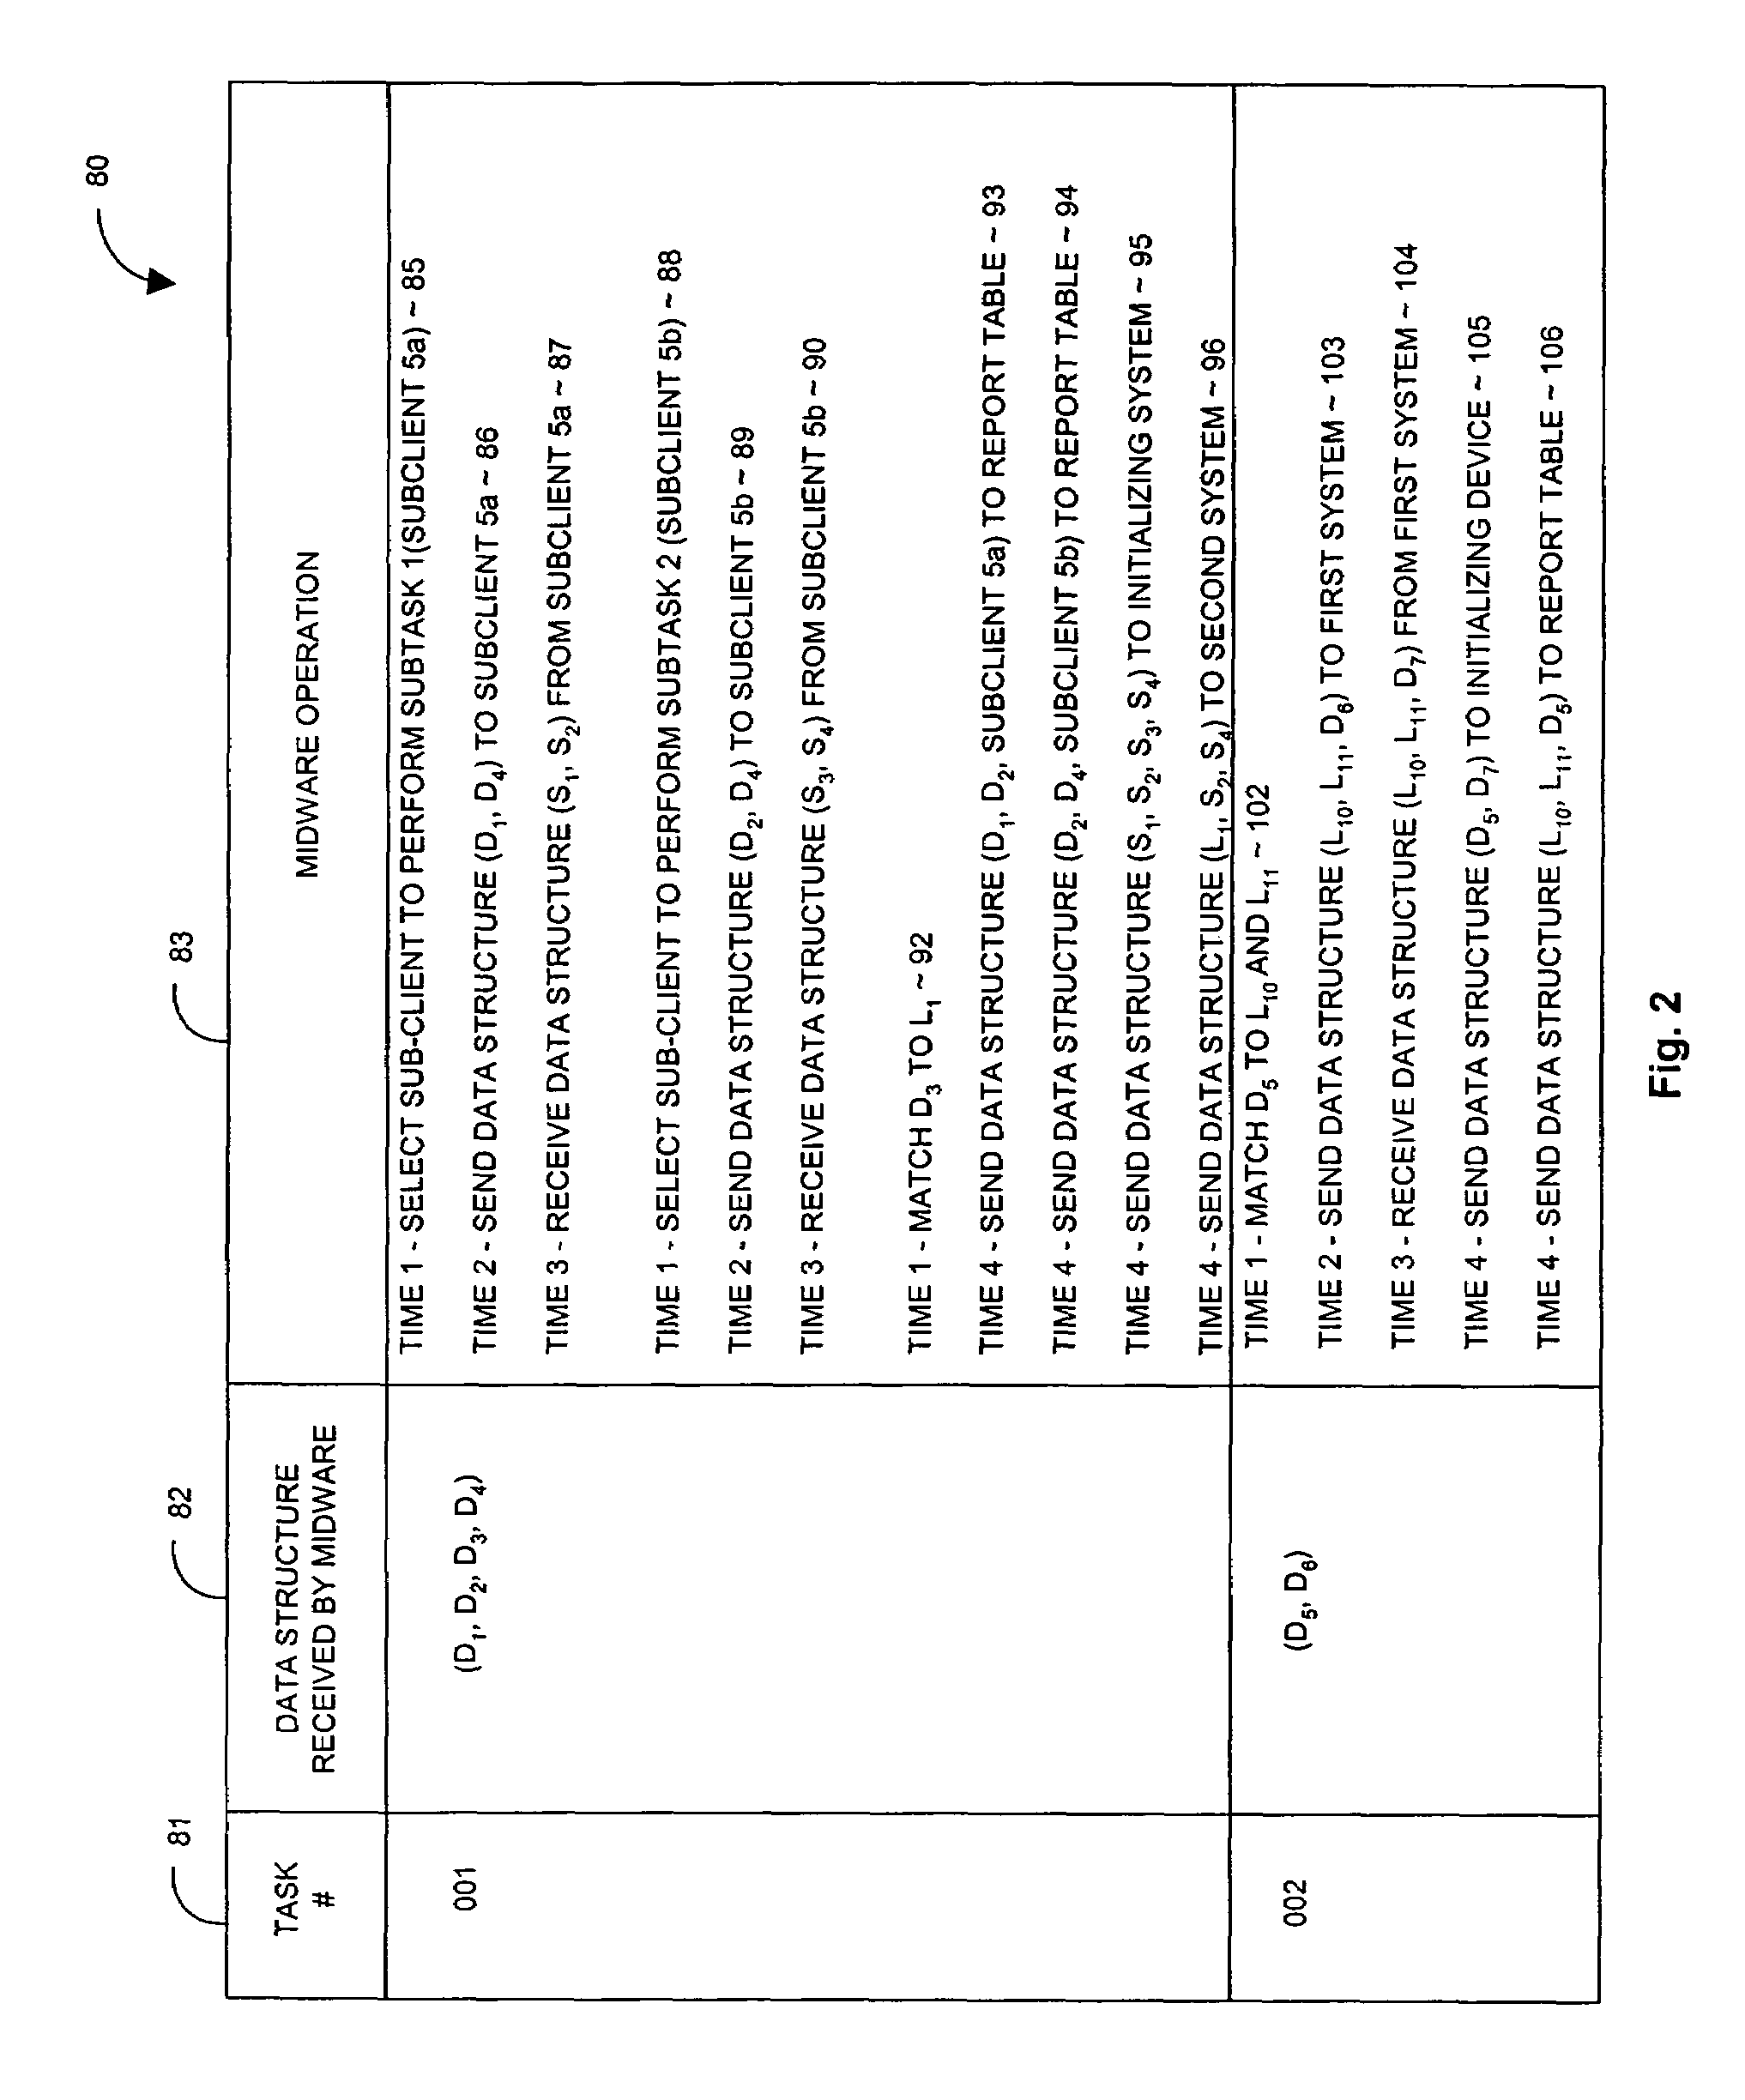 Method and apparatus for tracking transactions in an enterprise computer network